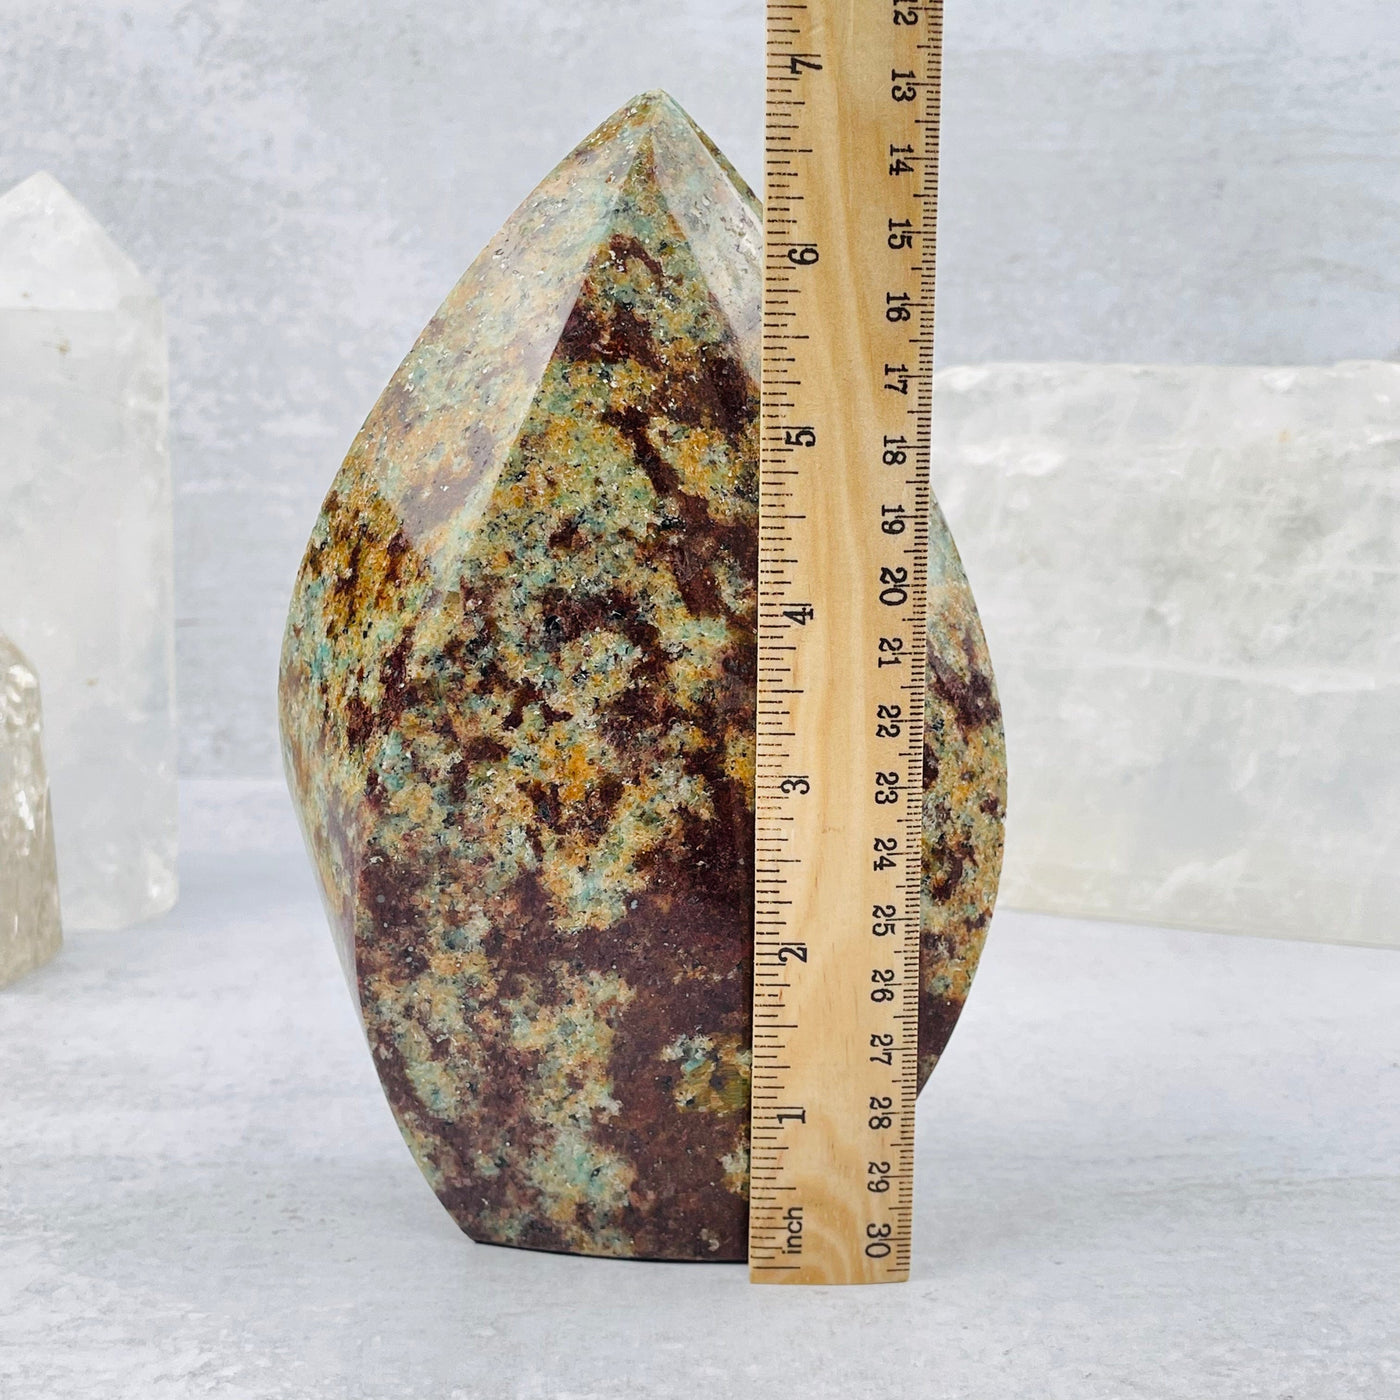 Amazonite Polished Flame tower next to a ruler for size reference 